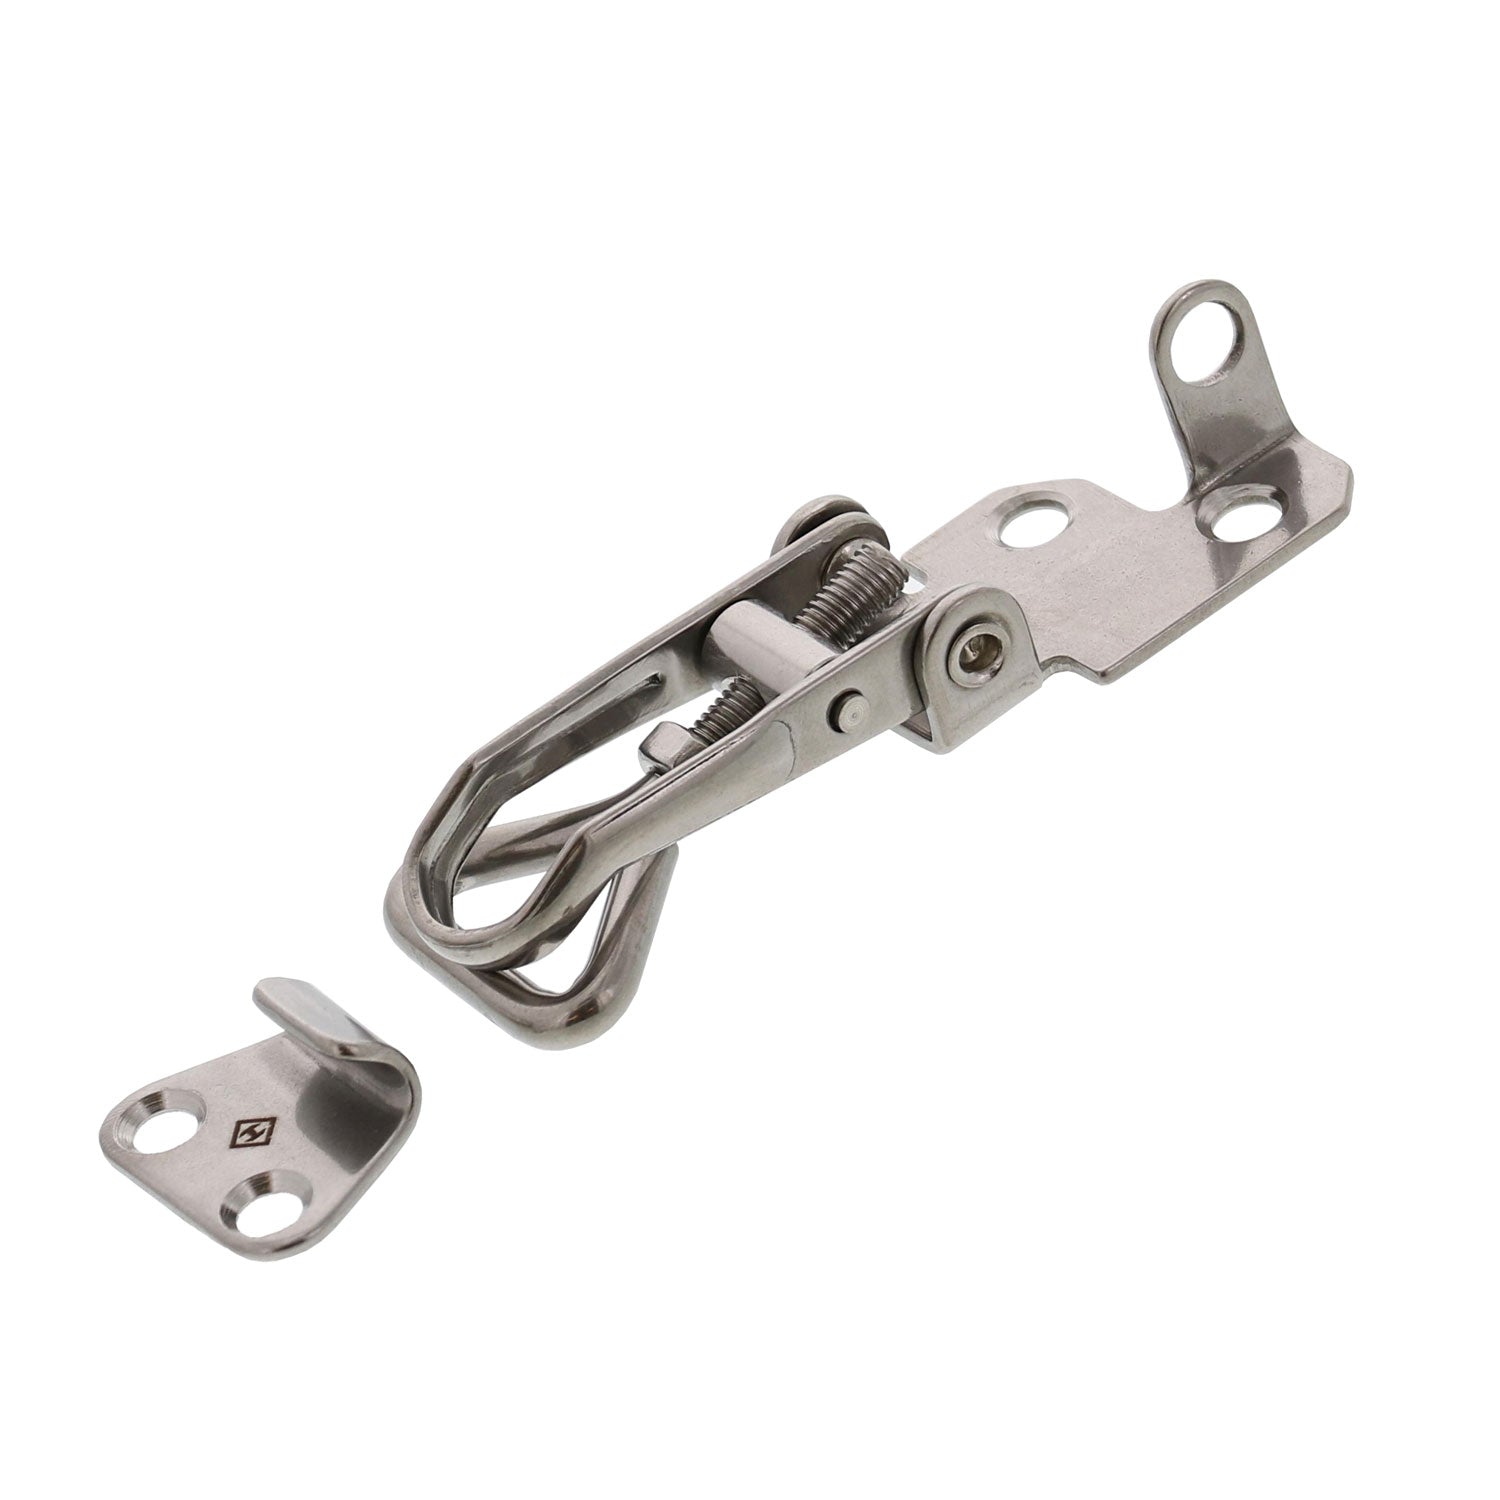 Stainless Steel Locking Device, Style 1301